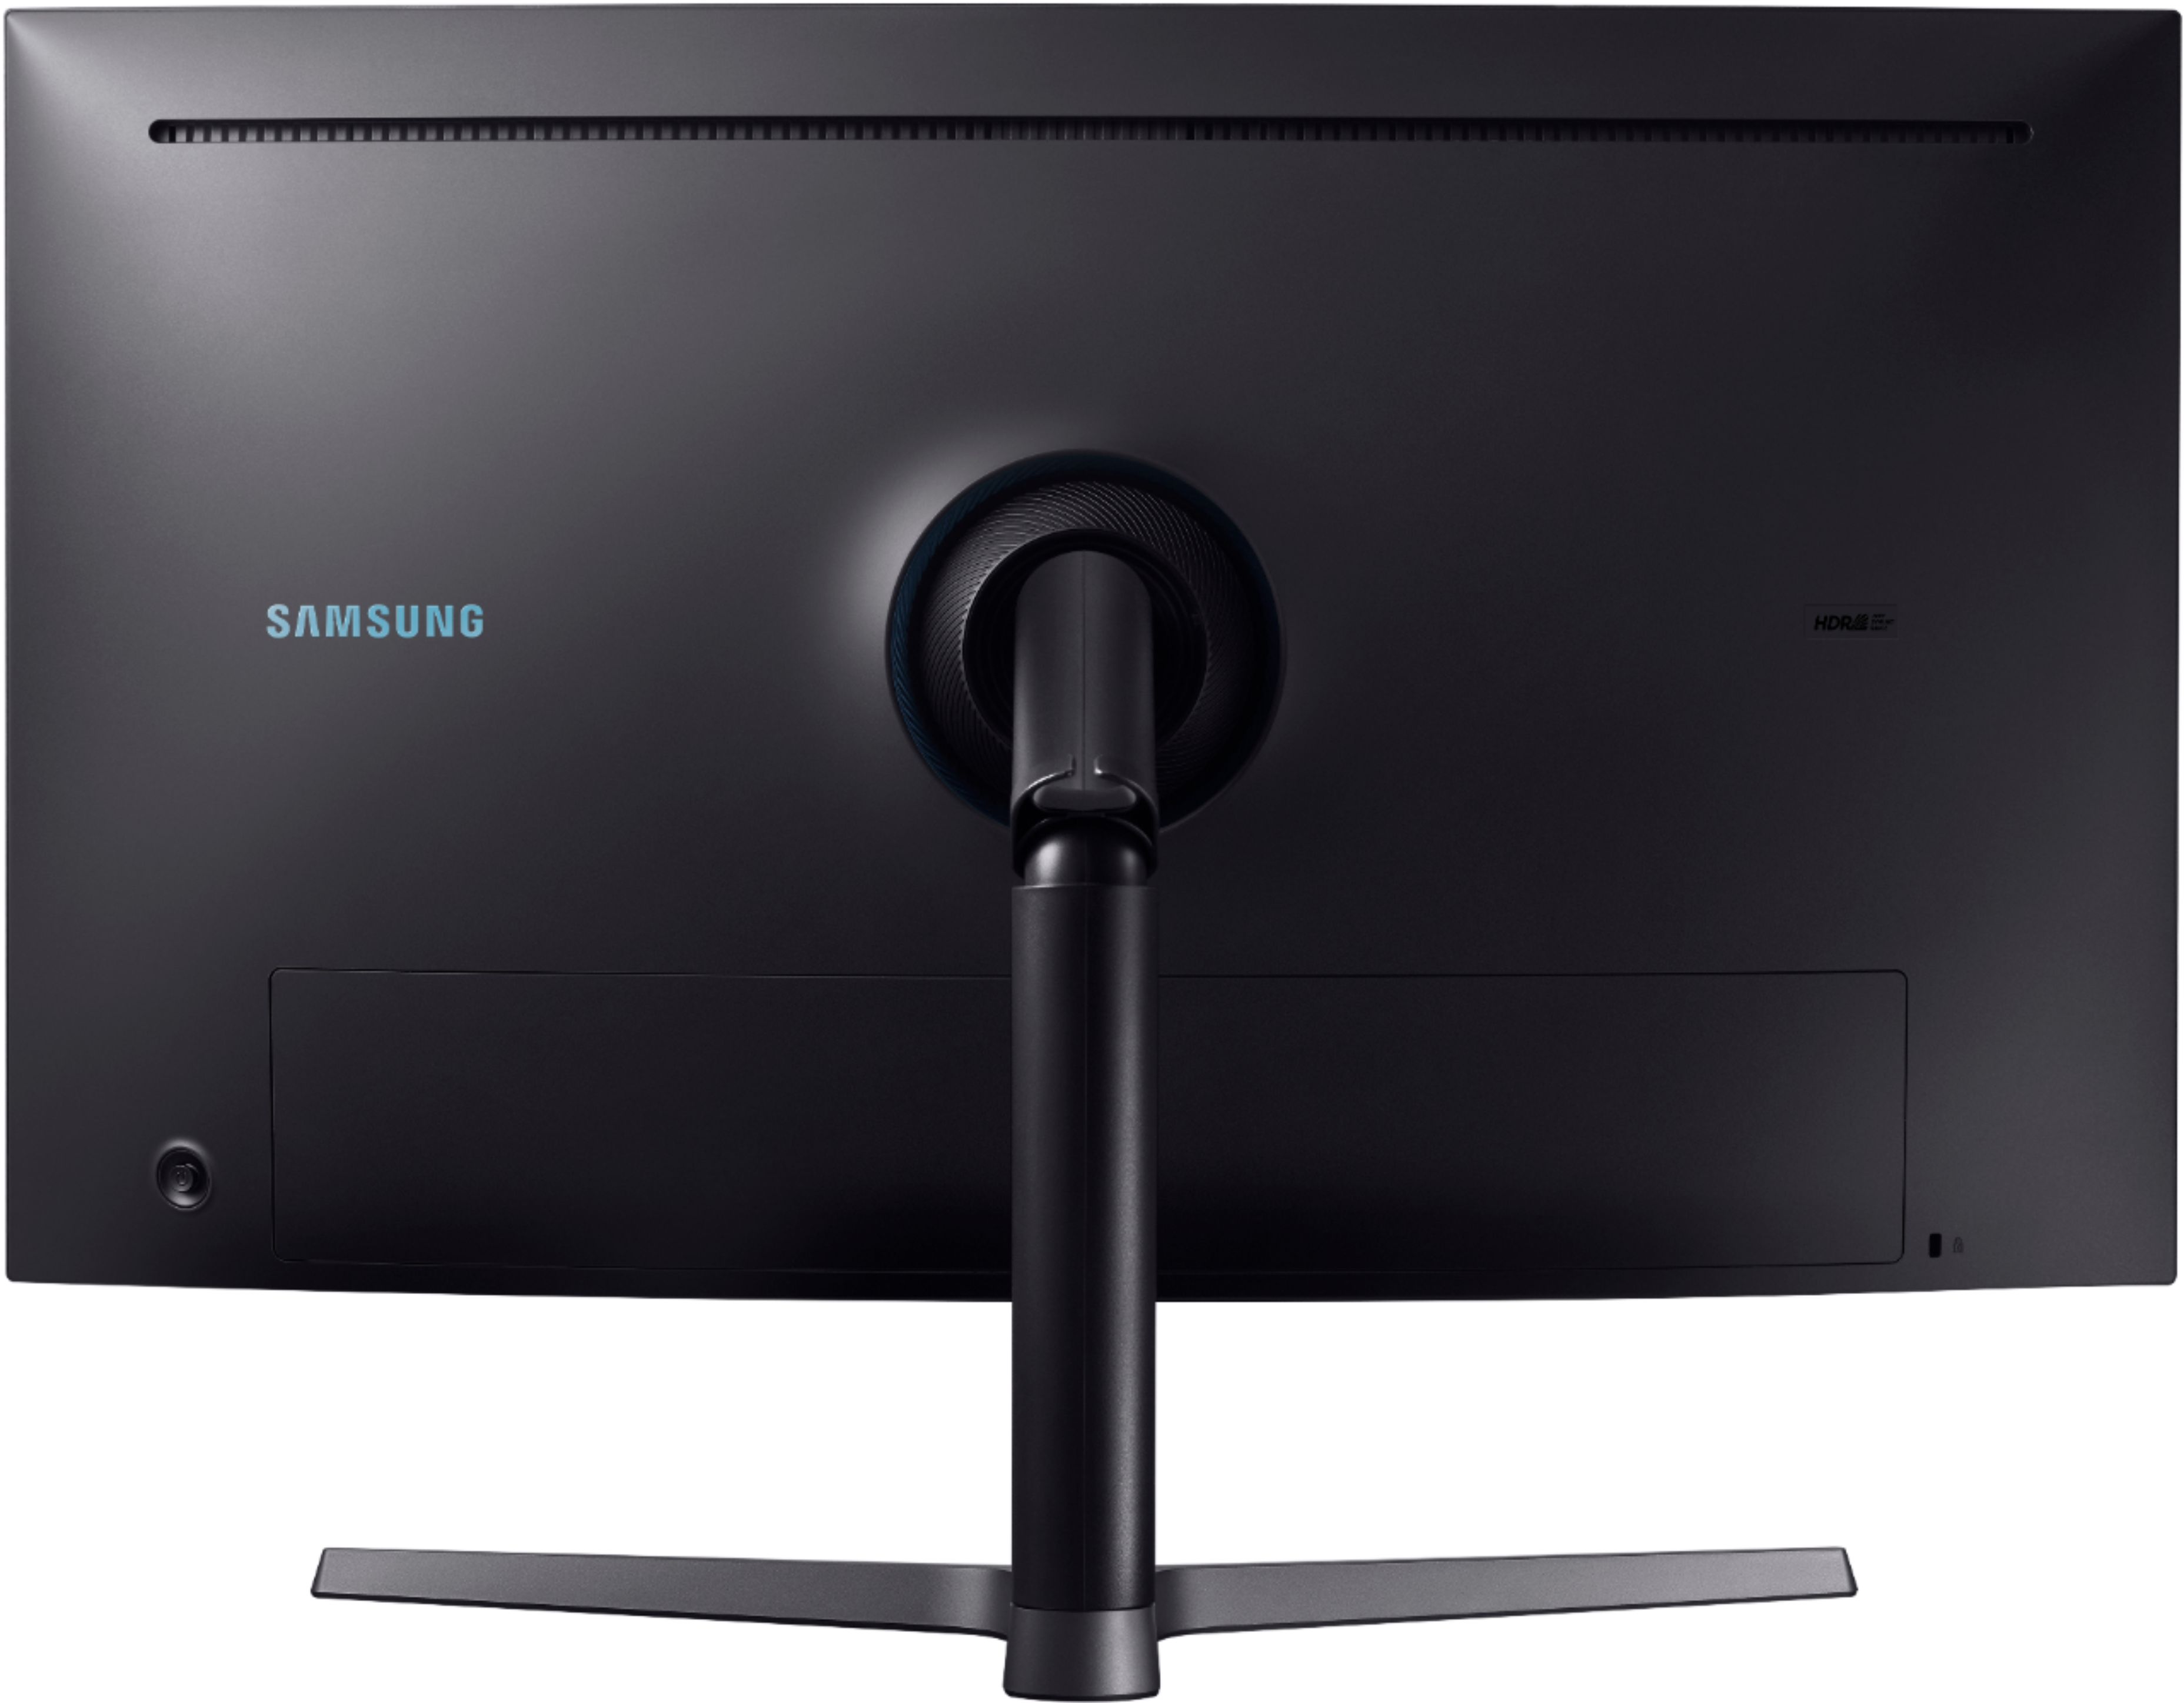 Back View: Samsung - Geek Squad Certified Refurbished 32" LED Curved QHD FreeSync Monitor with HDR - Matte Dark Blue/Gray